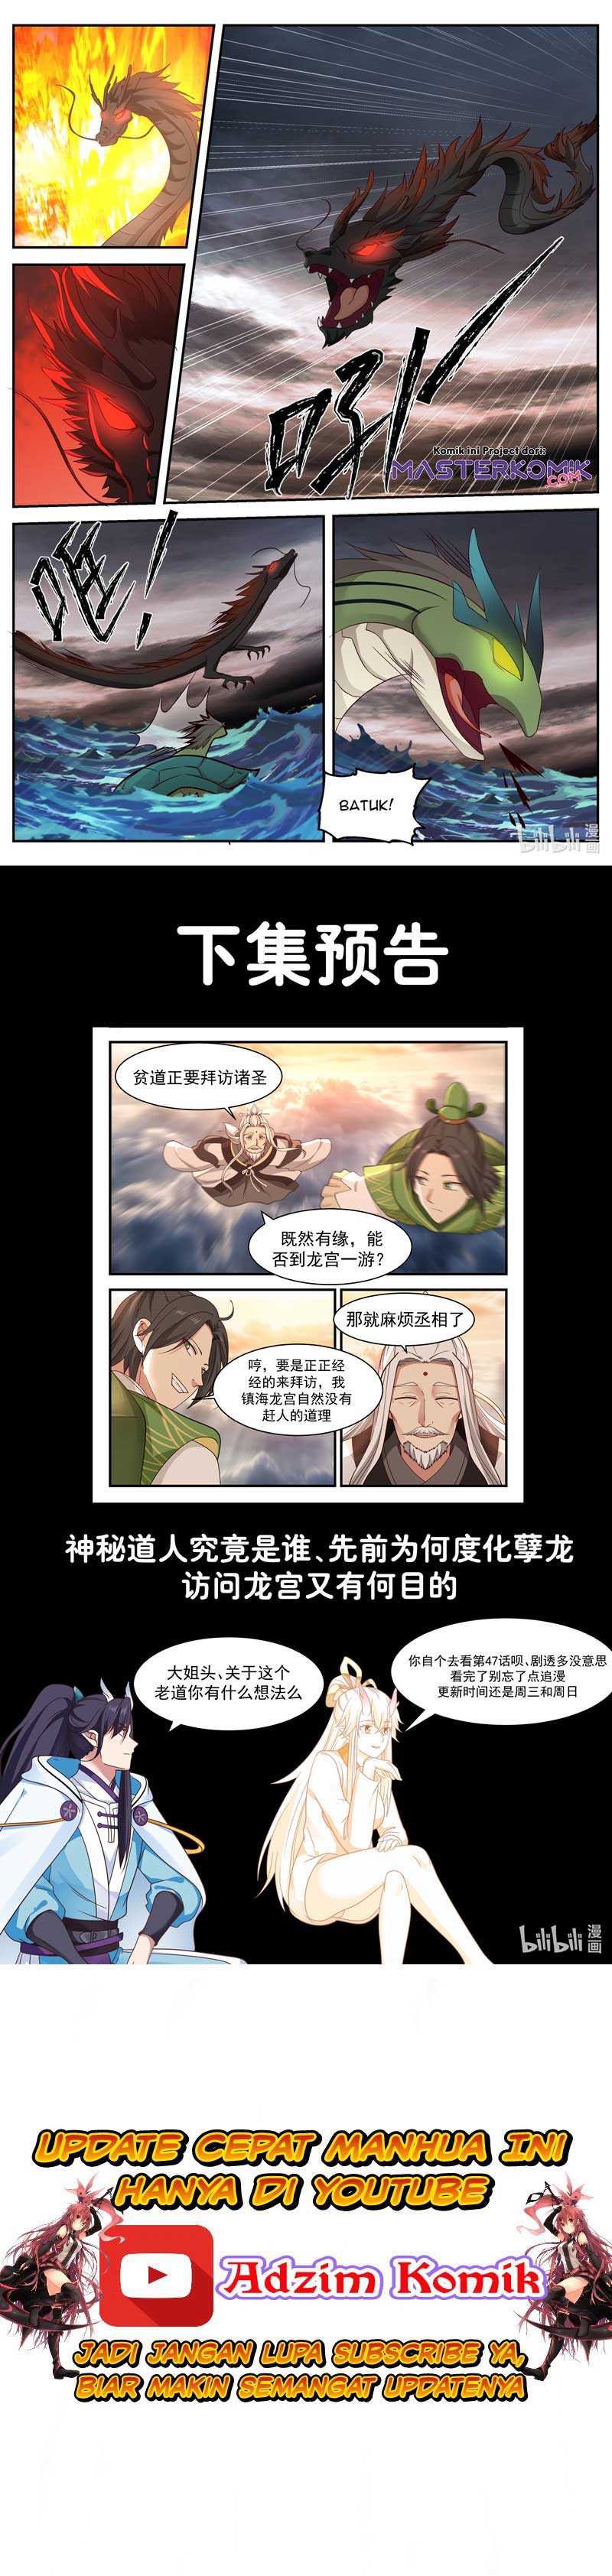 Dragon Throne Chapter 46